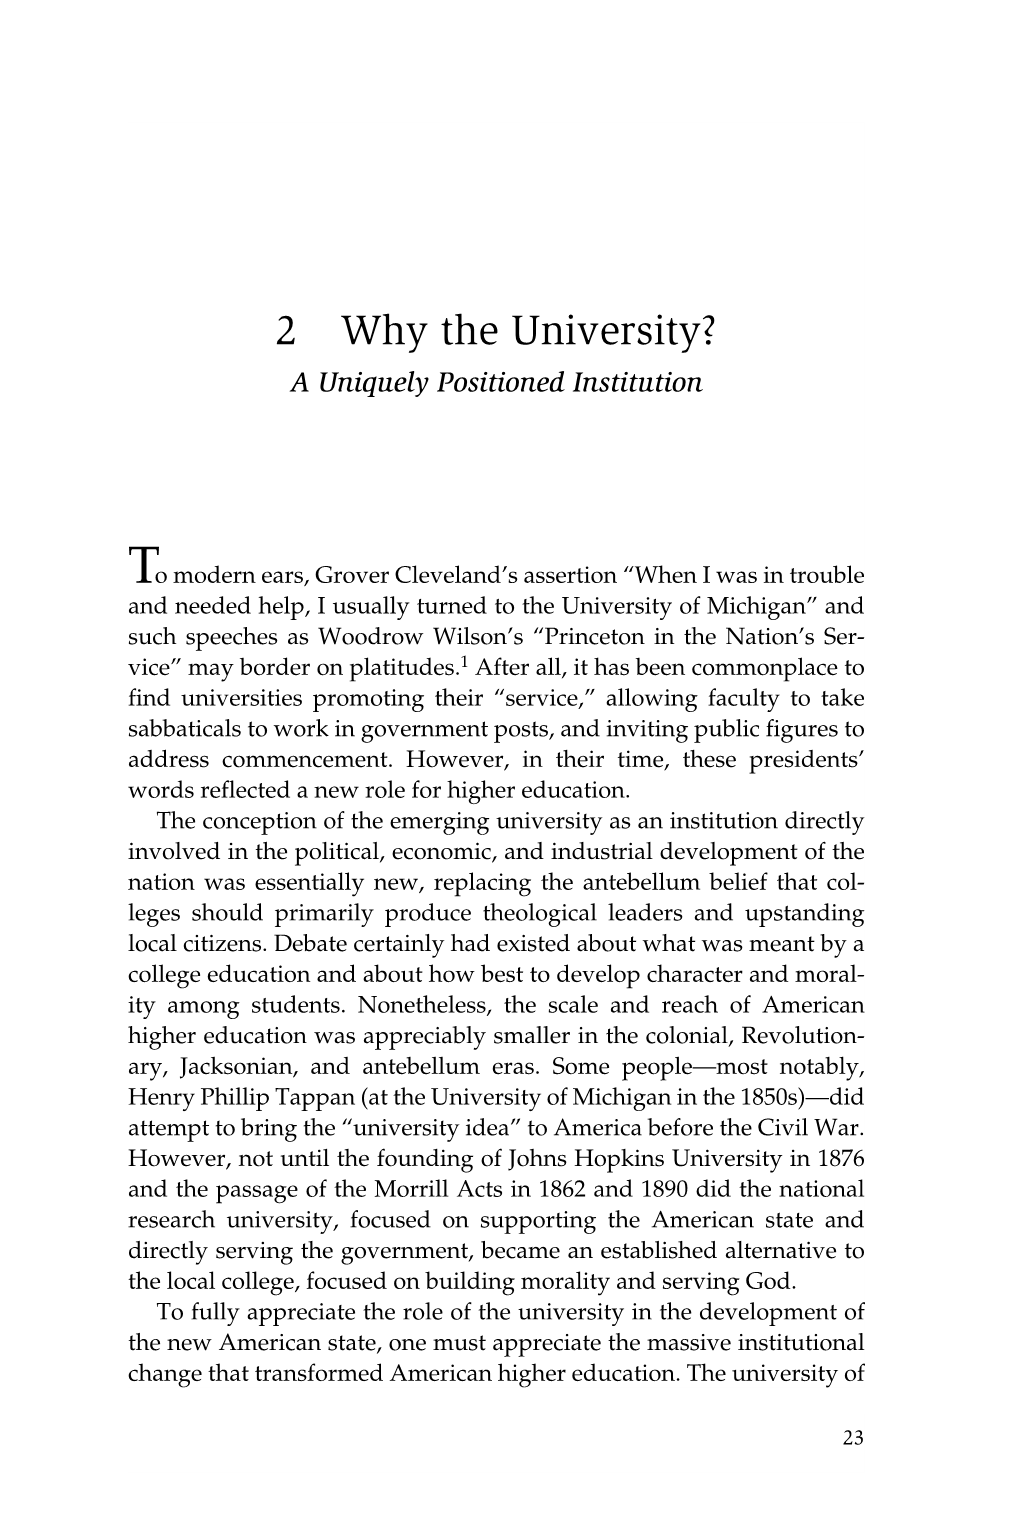 Chapter 2: Why the University? a Uniquely Positioned Institution